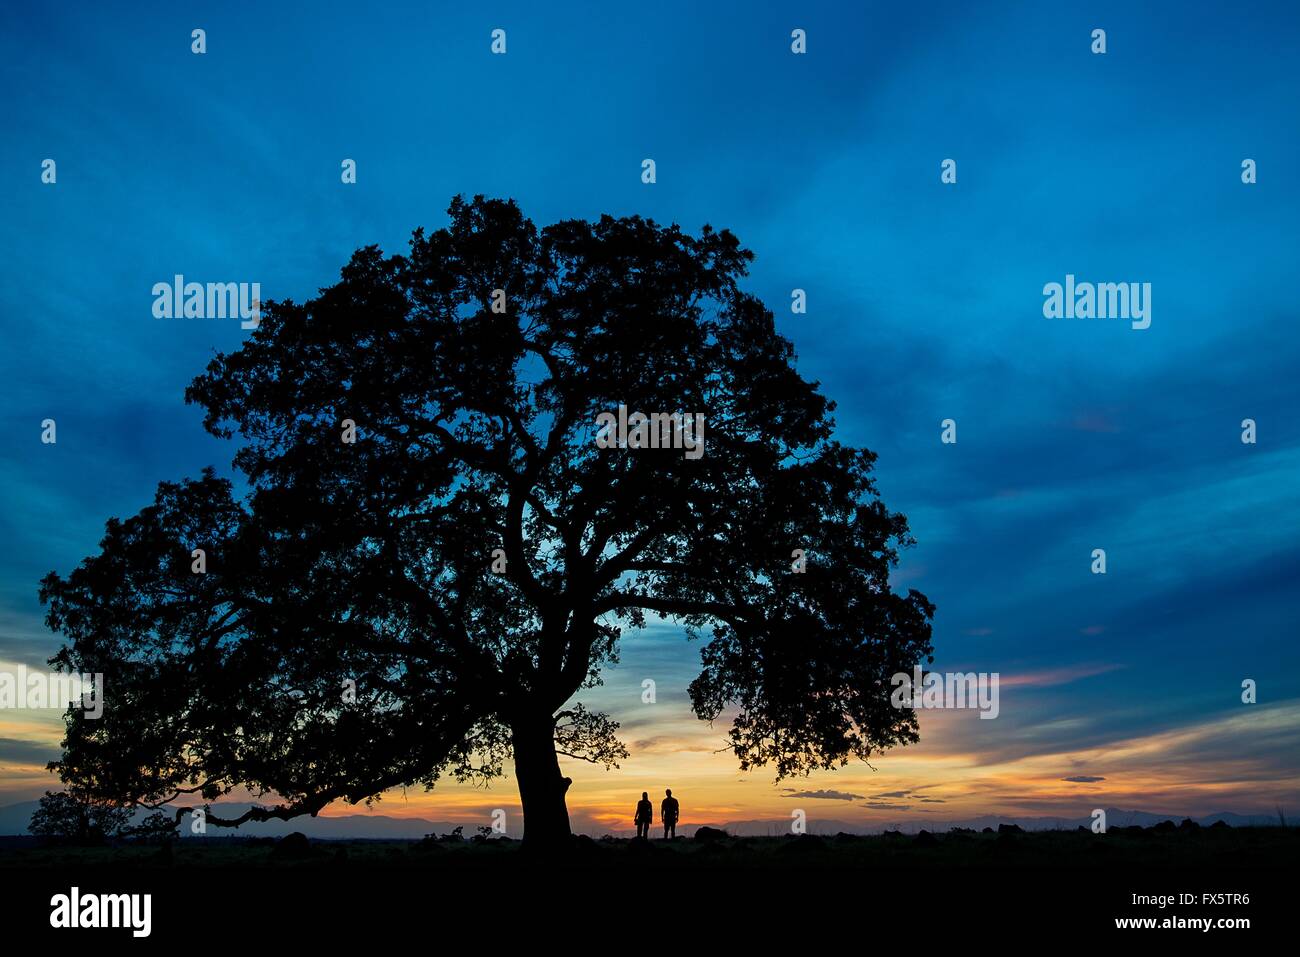 A couple watch the sunset from under an ancient blue oak tree on a wetland savannah at the Sacramento River Bend Outstanding Natural Area preserve near Redding, California. Stock Photo